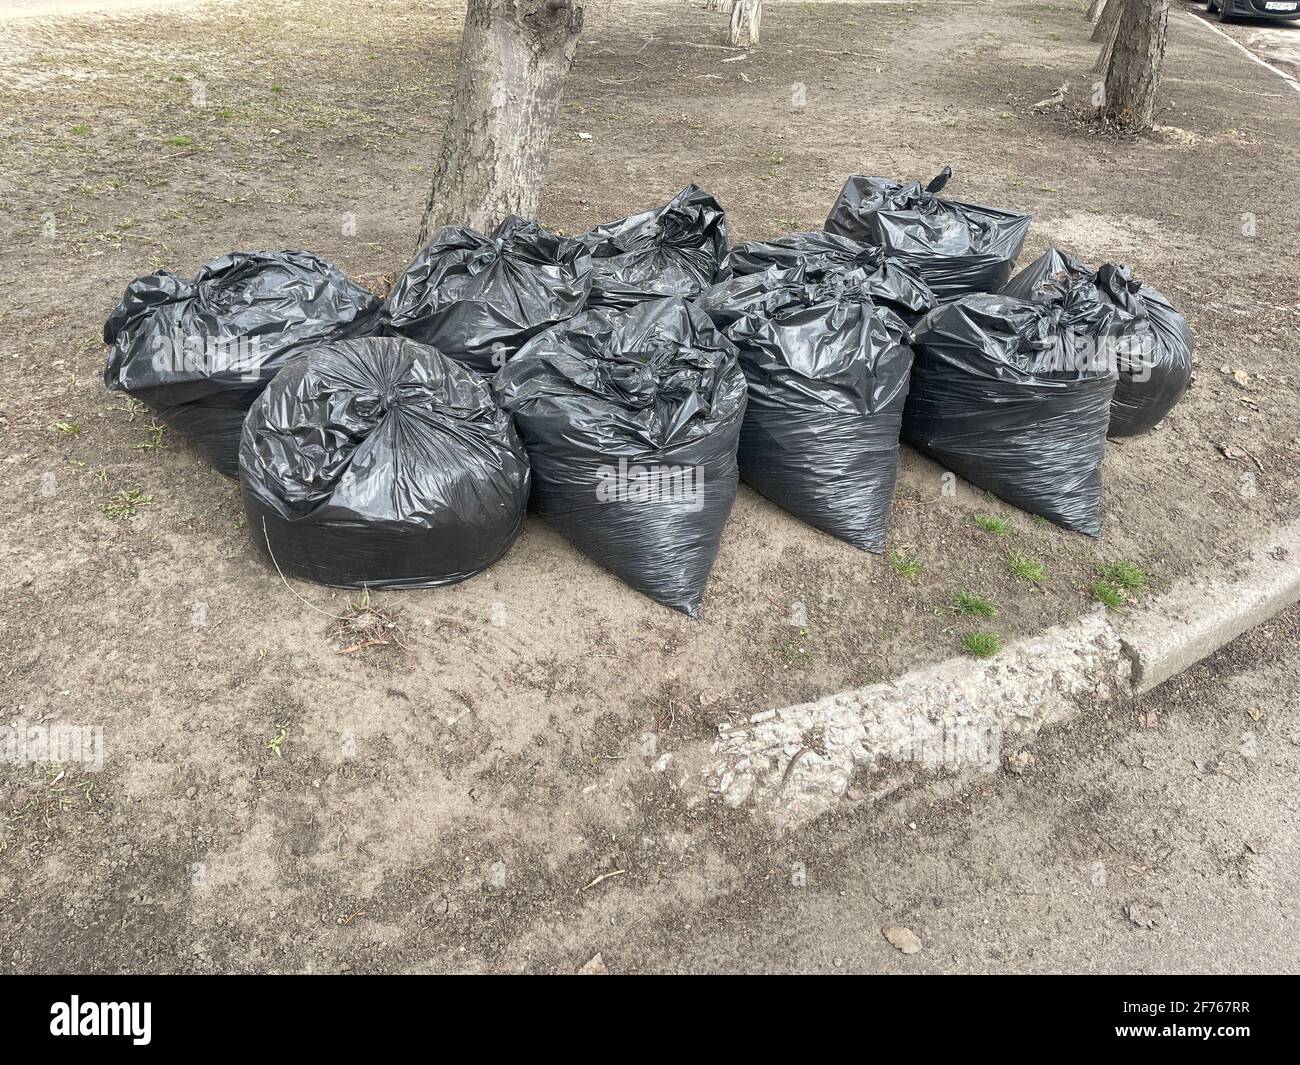 https://c8.alamy.com/comp/2F767RR/collected-in-black-bags-of-fallen-leaves-on-a-city-street-black-plastic-bags-full-of-leaves-seasonal-cleaning-of-city-streets-from-fallen-leaves-2F767RR.jpg